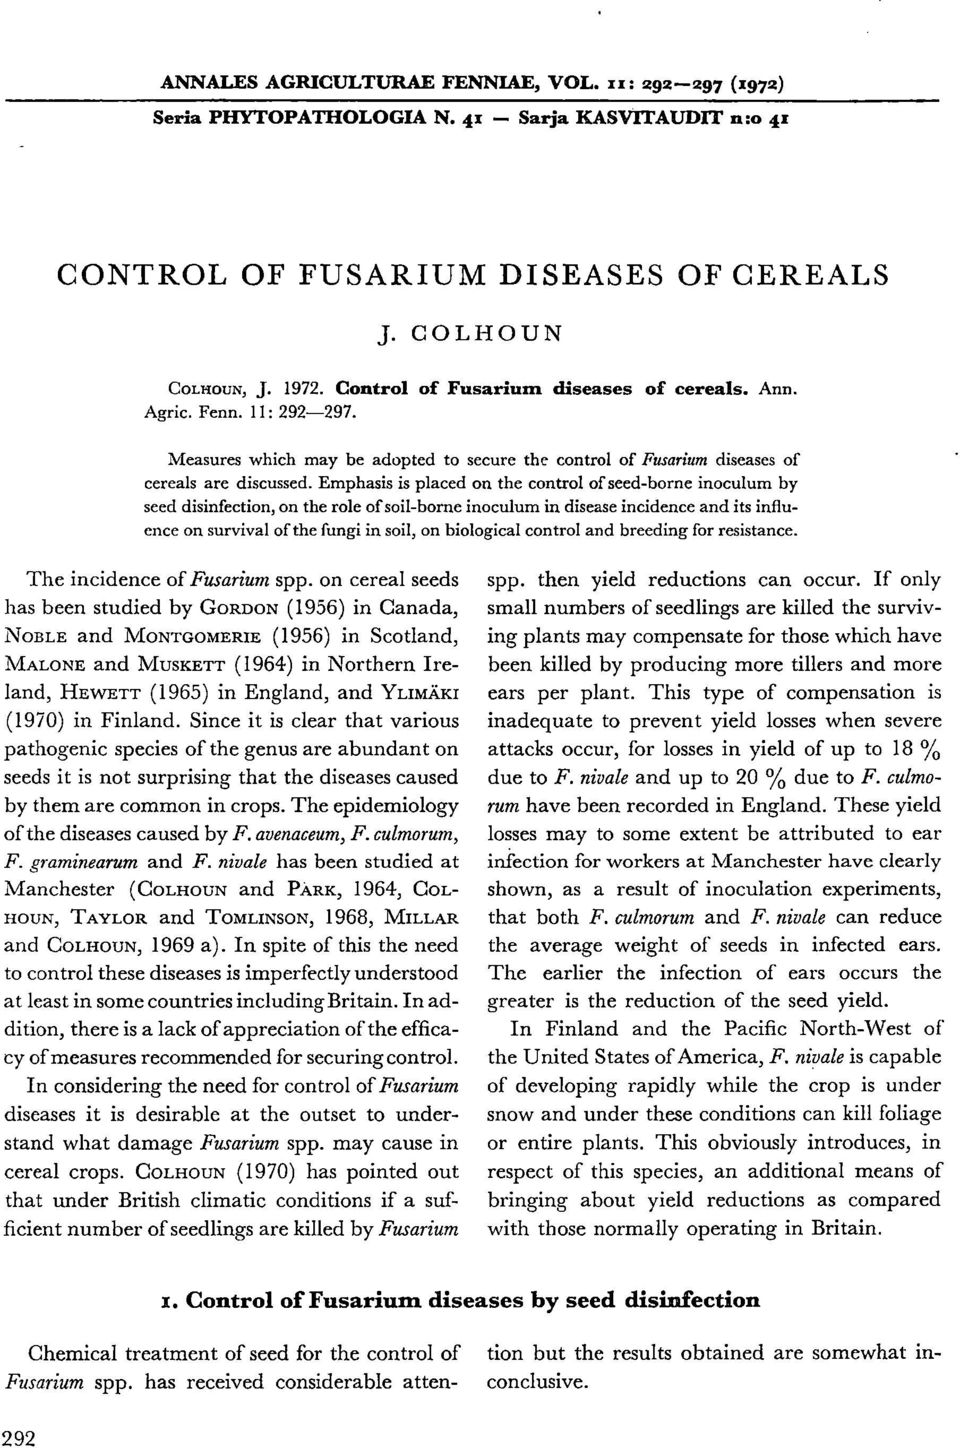 Emphasis is placed on the control of seed-borne inoculum by seed disinfection, on the role of soil-borne inoculum in disease incidence and its influence on survival of the fungi in soil, on